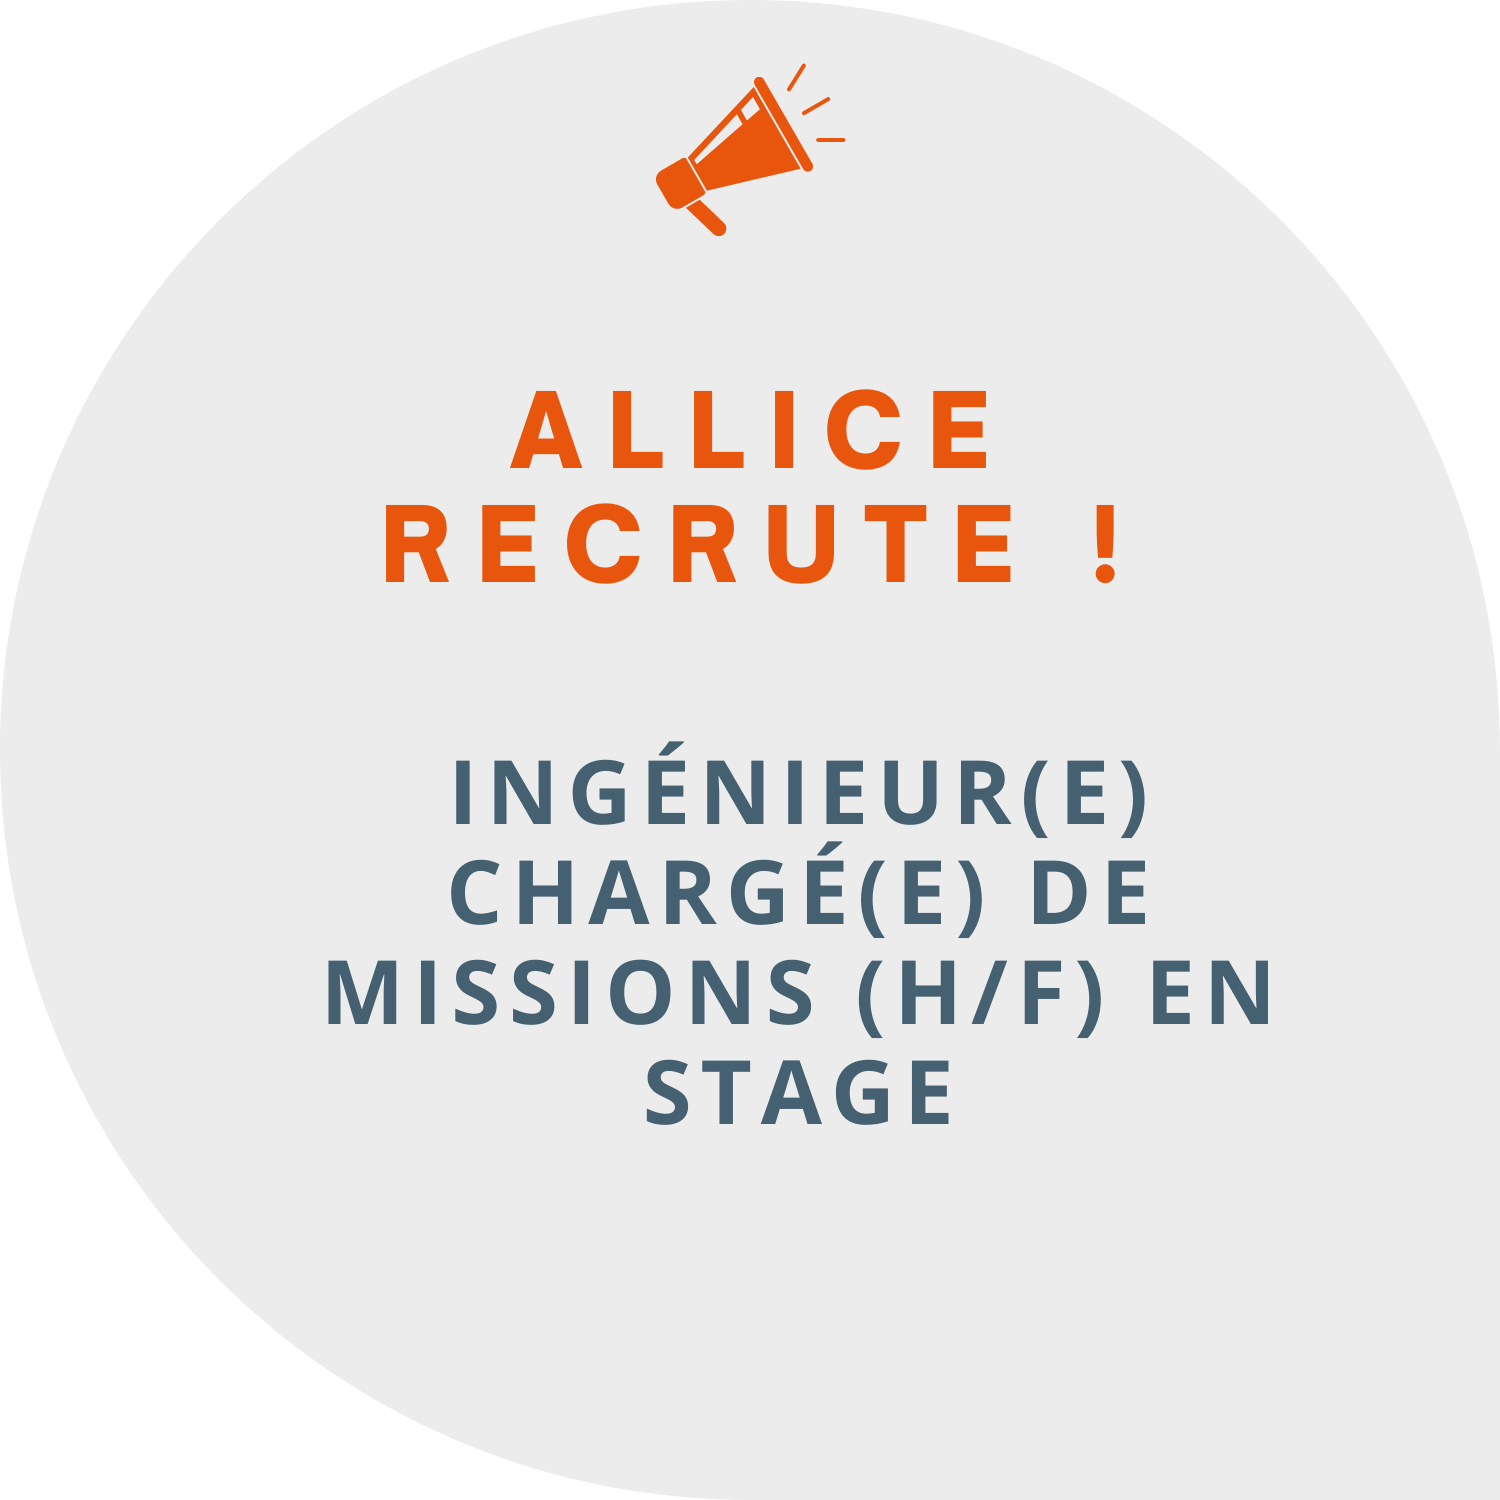 2022_Actu_Recrutement_Stage_Ingenieur_Charge_Mission